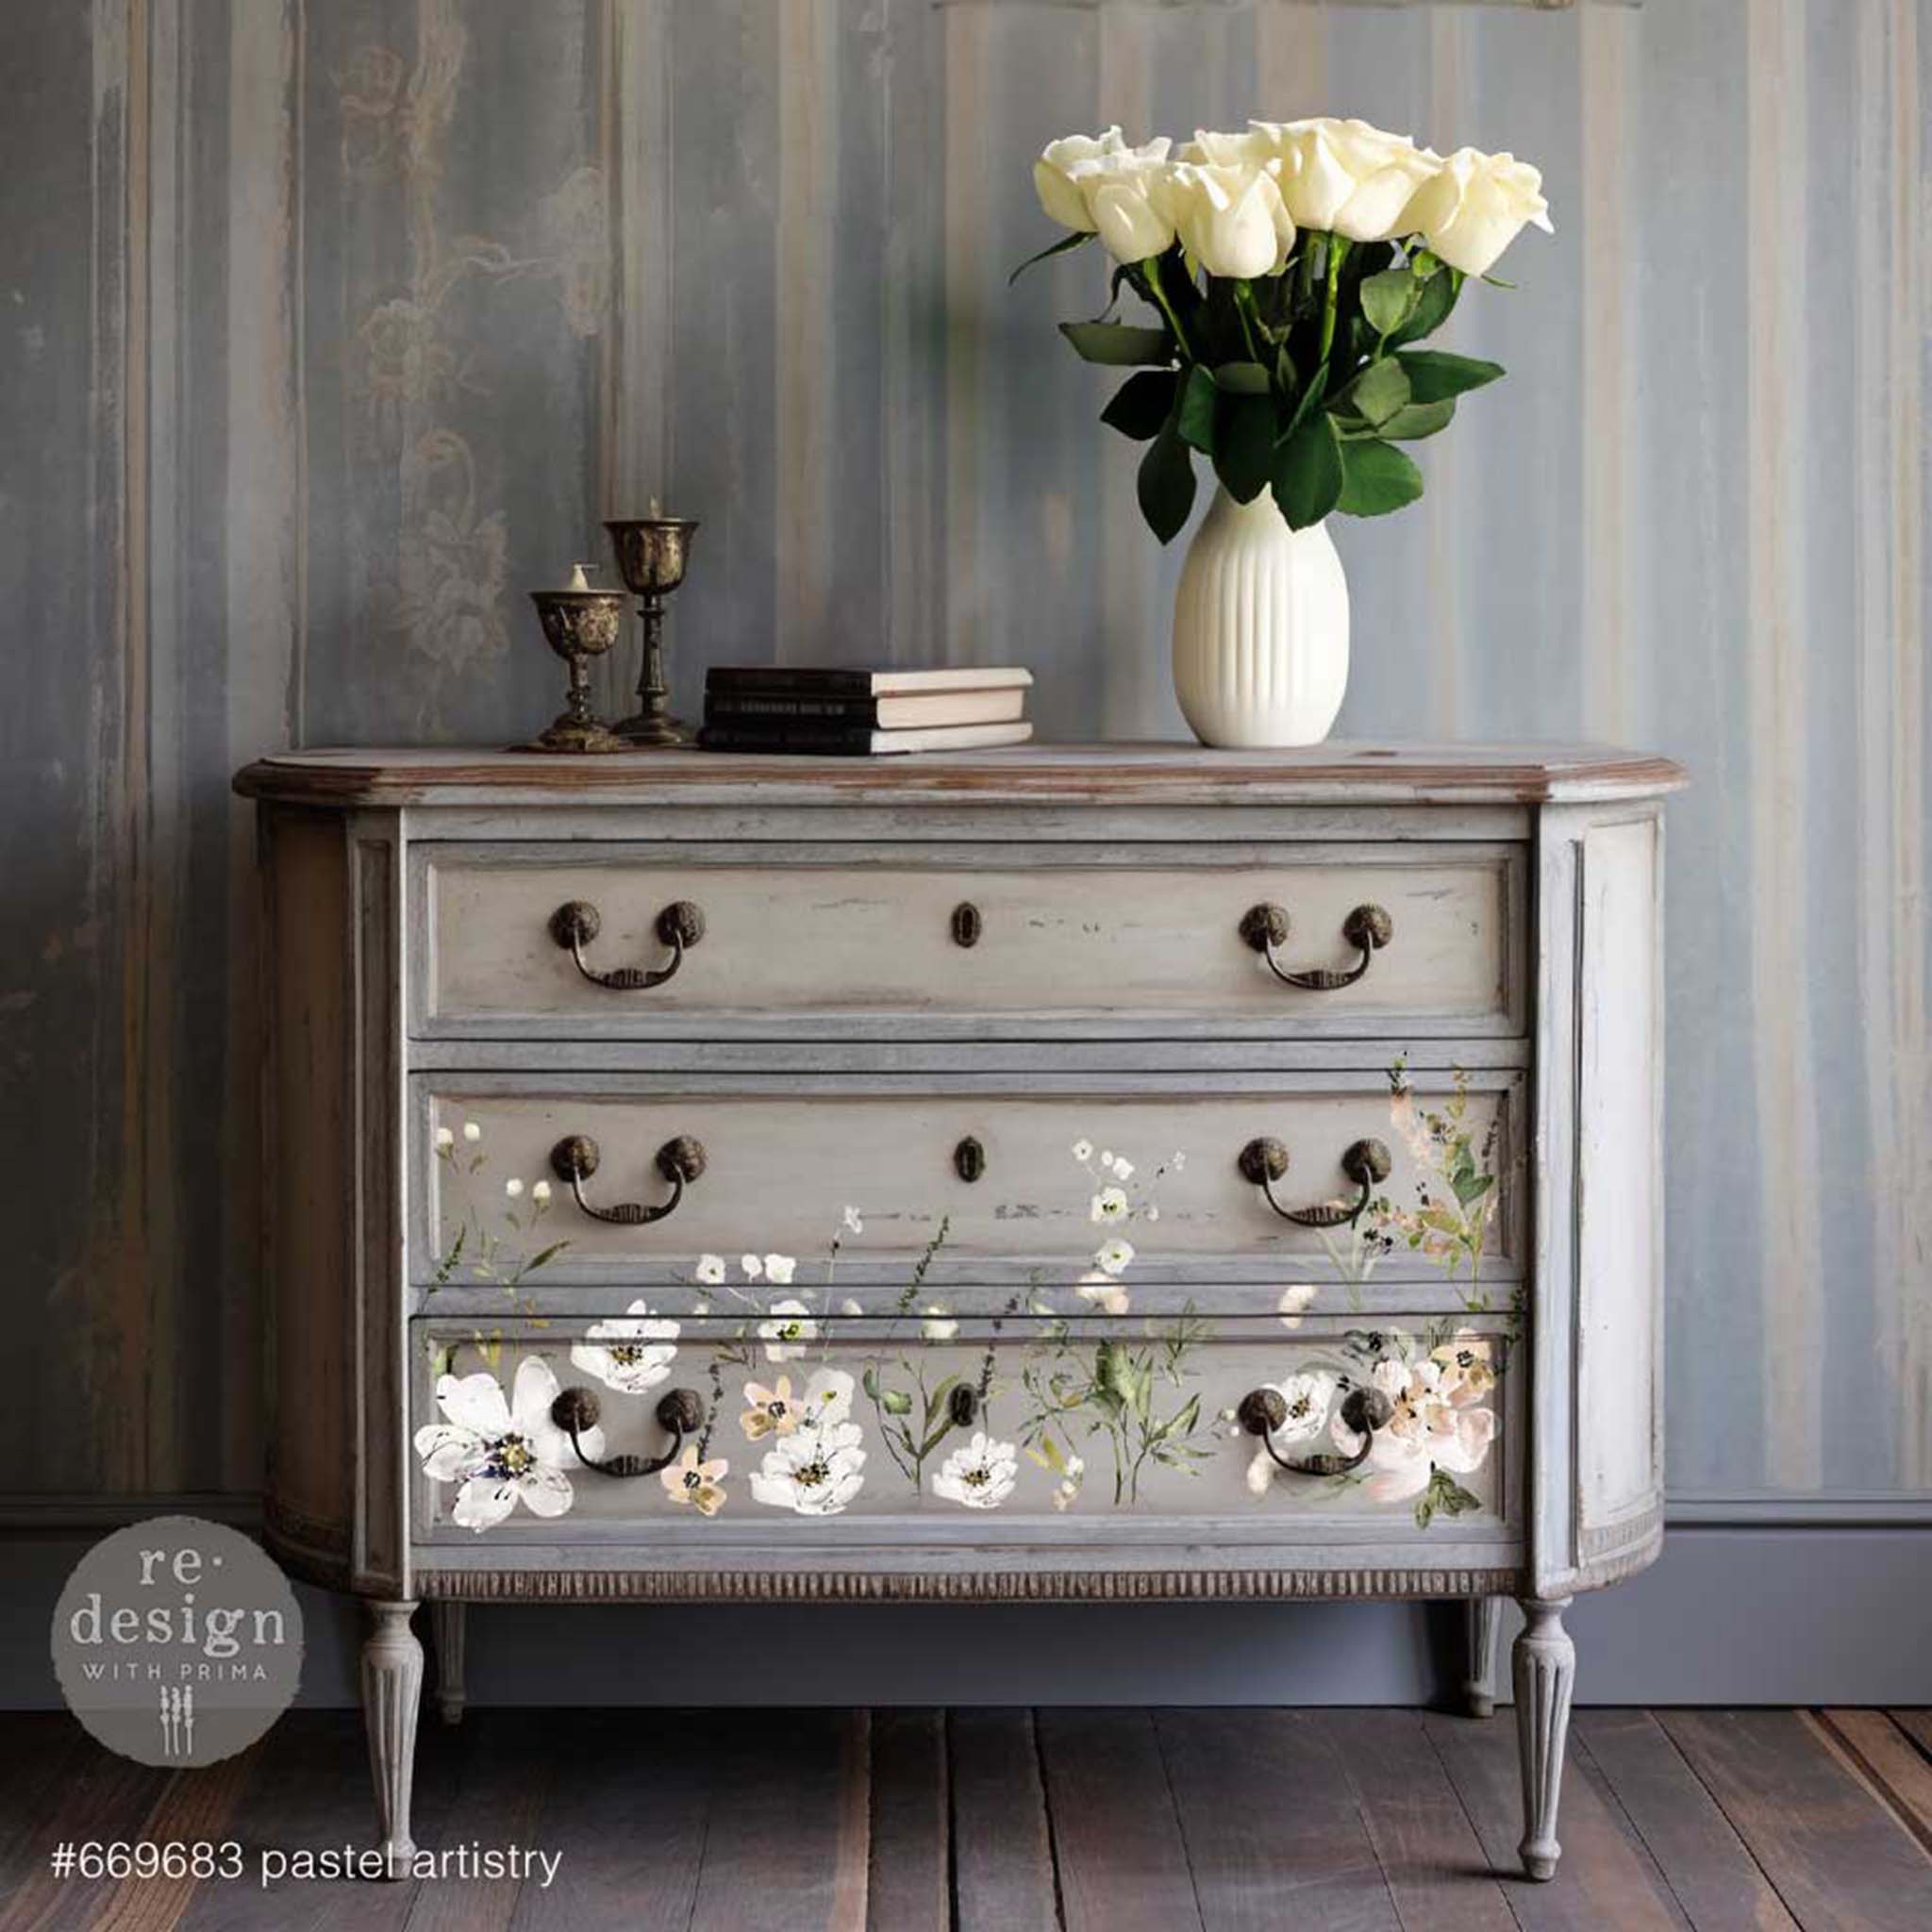 A vintage 3-drawer dresser is stained a light gray and features ReDesign with Prima's Pastels Artistry 12"x12" transfer on the bottom 2 drawers.